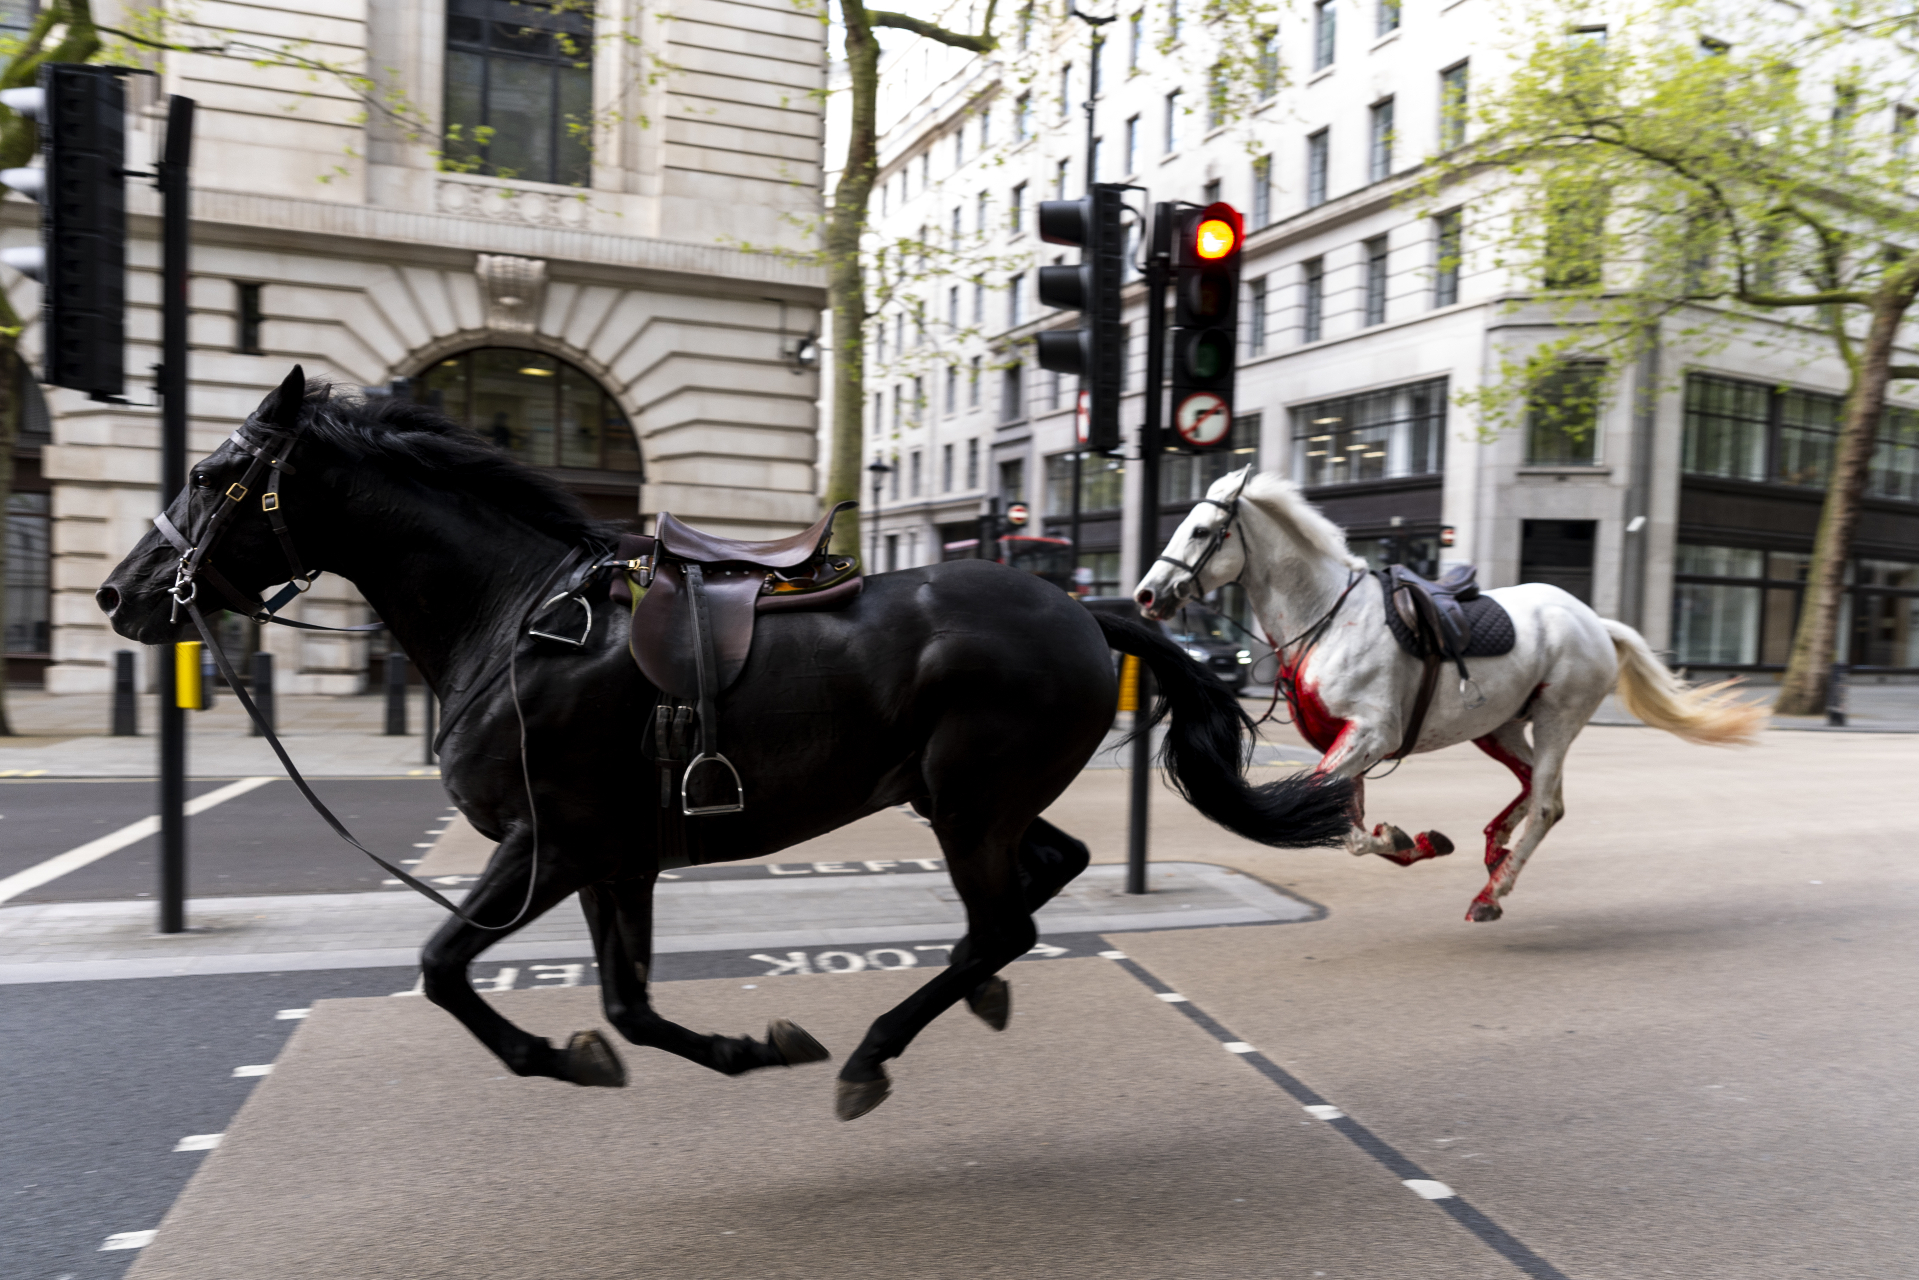 In pictures: Cavalry horses run loose causing havoc in London